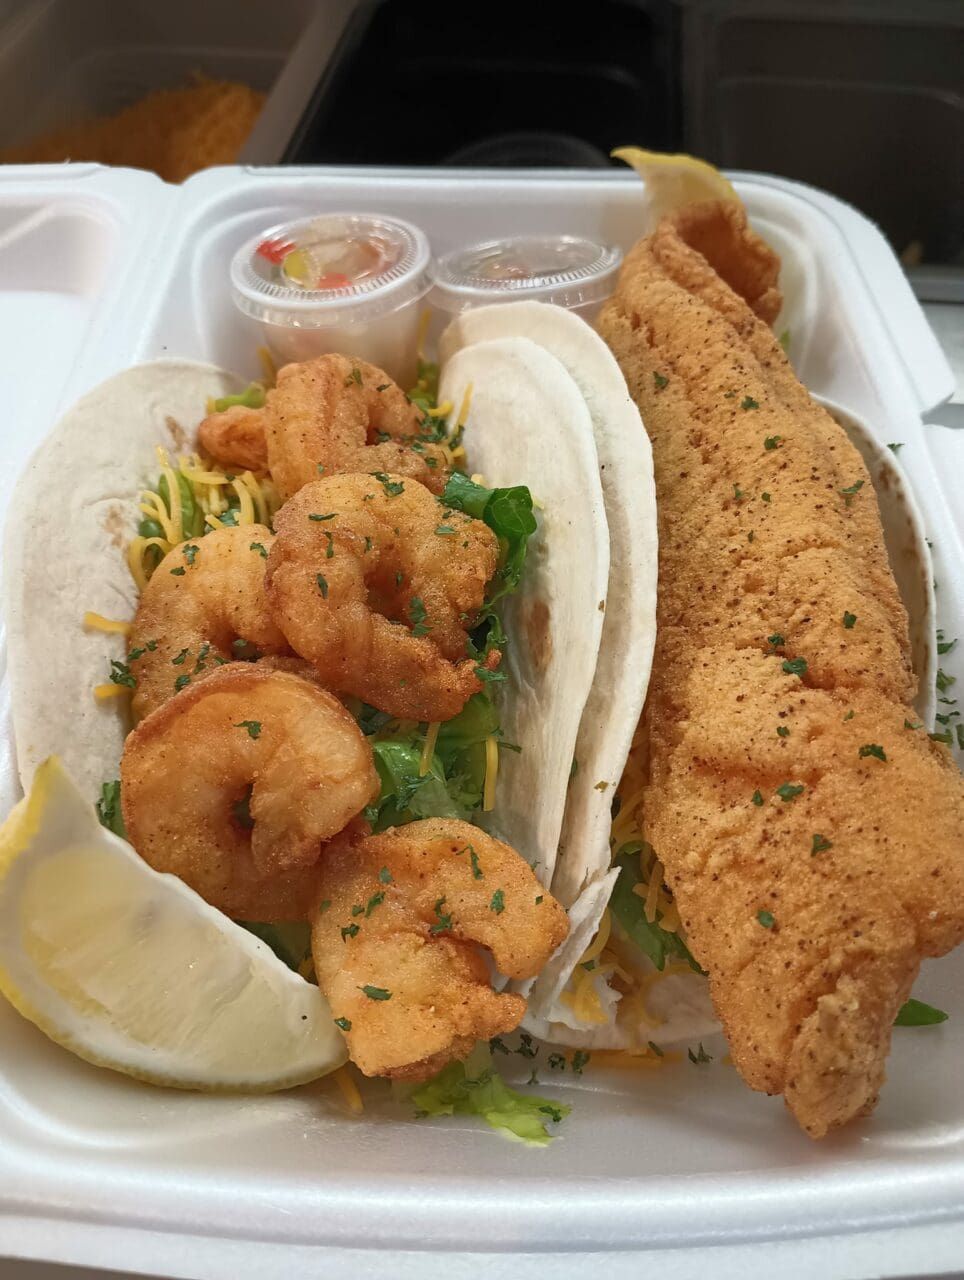 a to go box with fried fish and shrimp